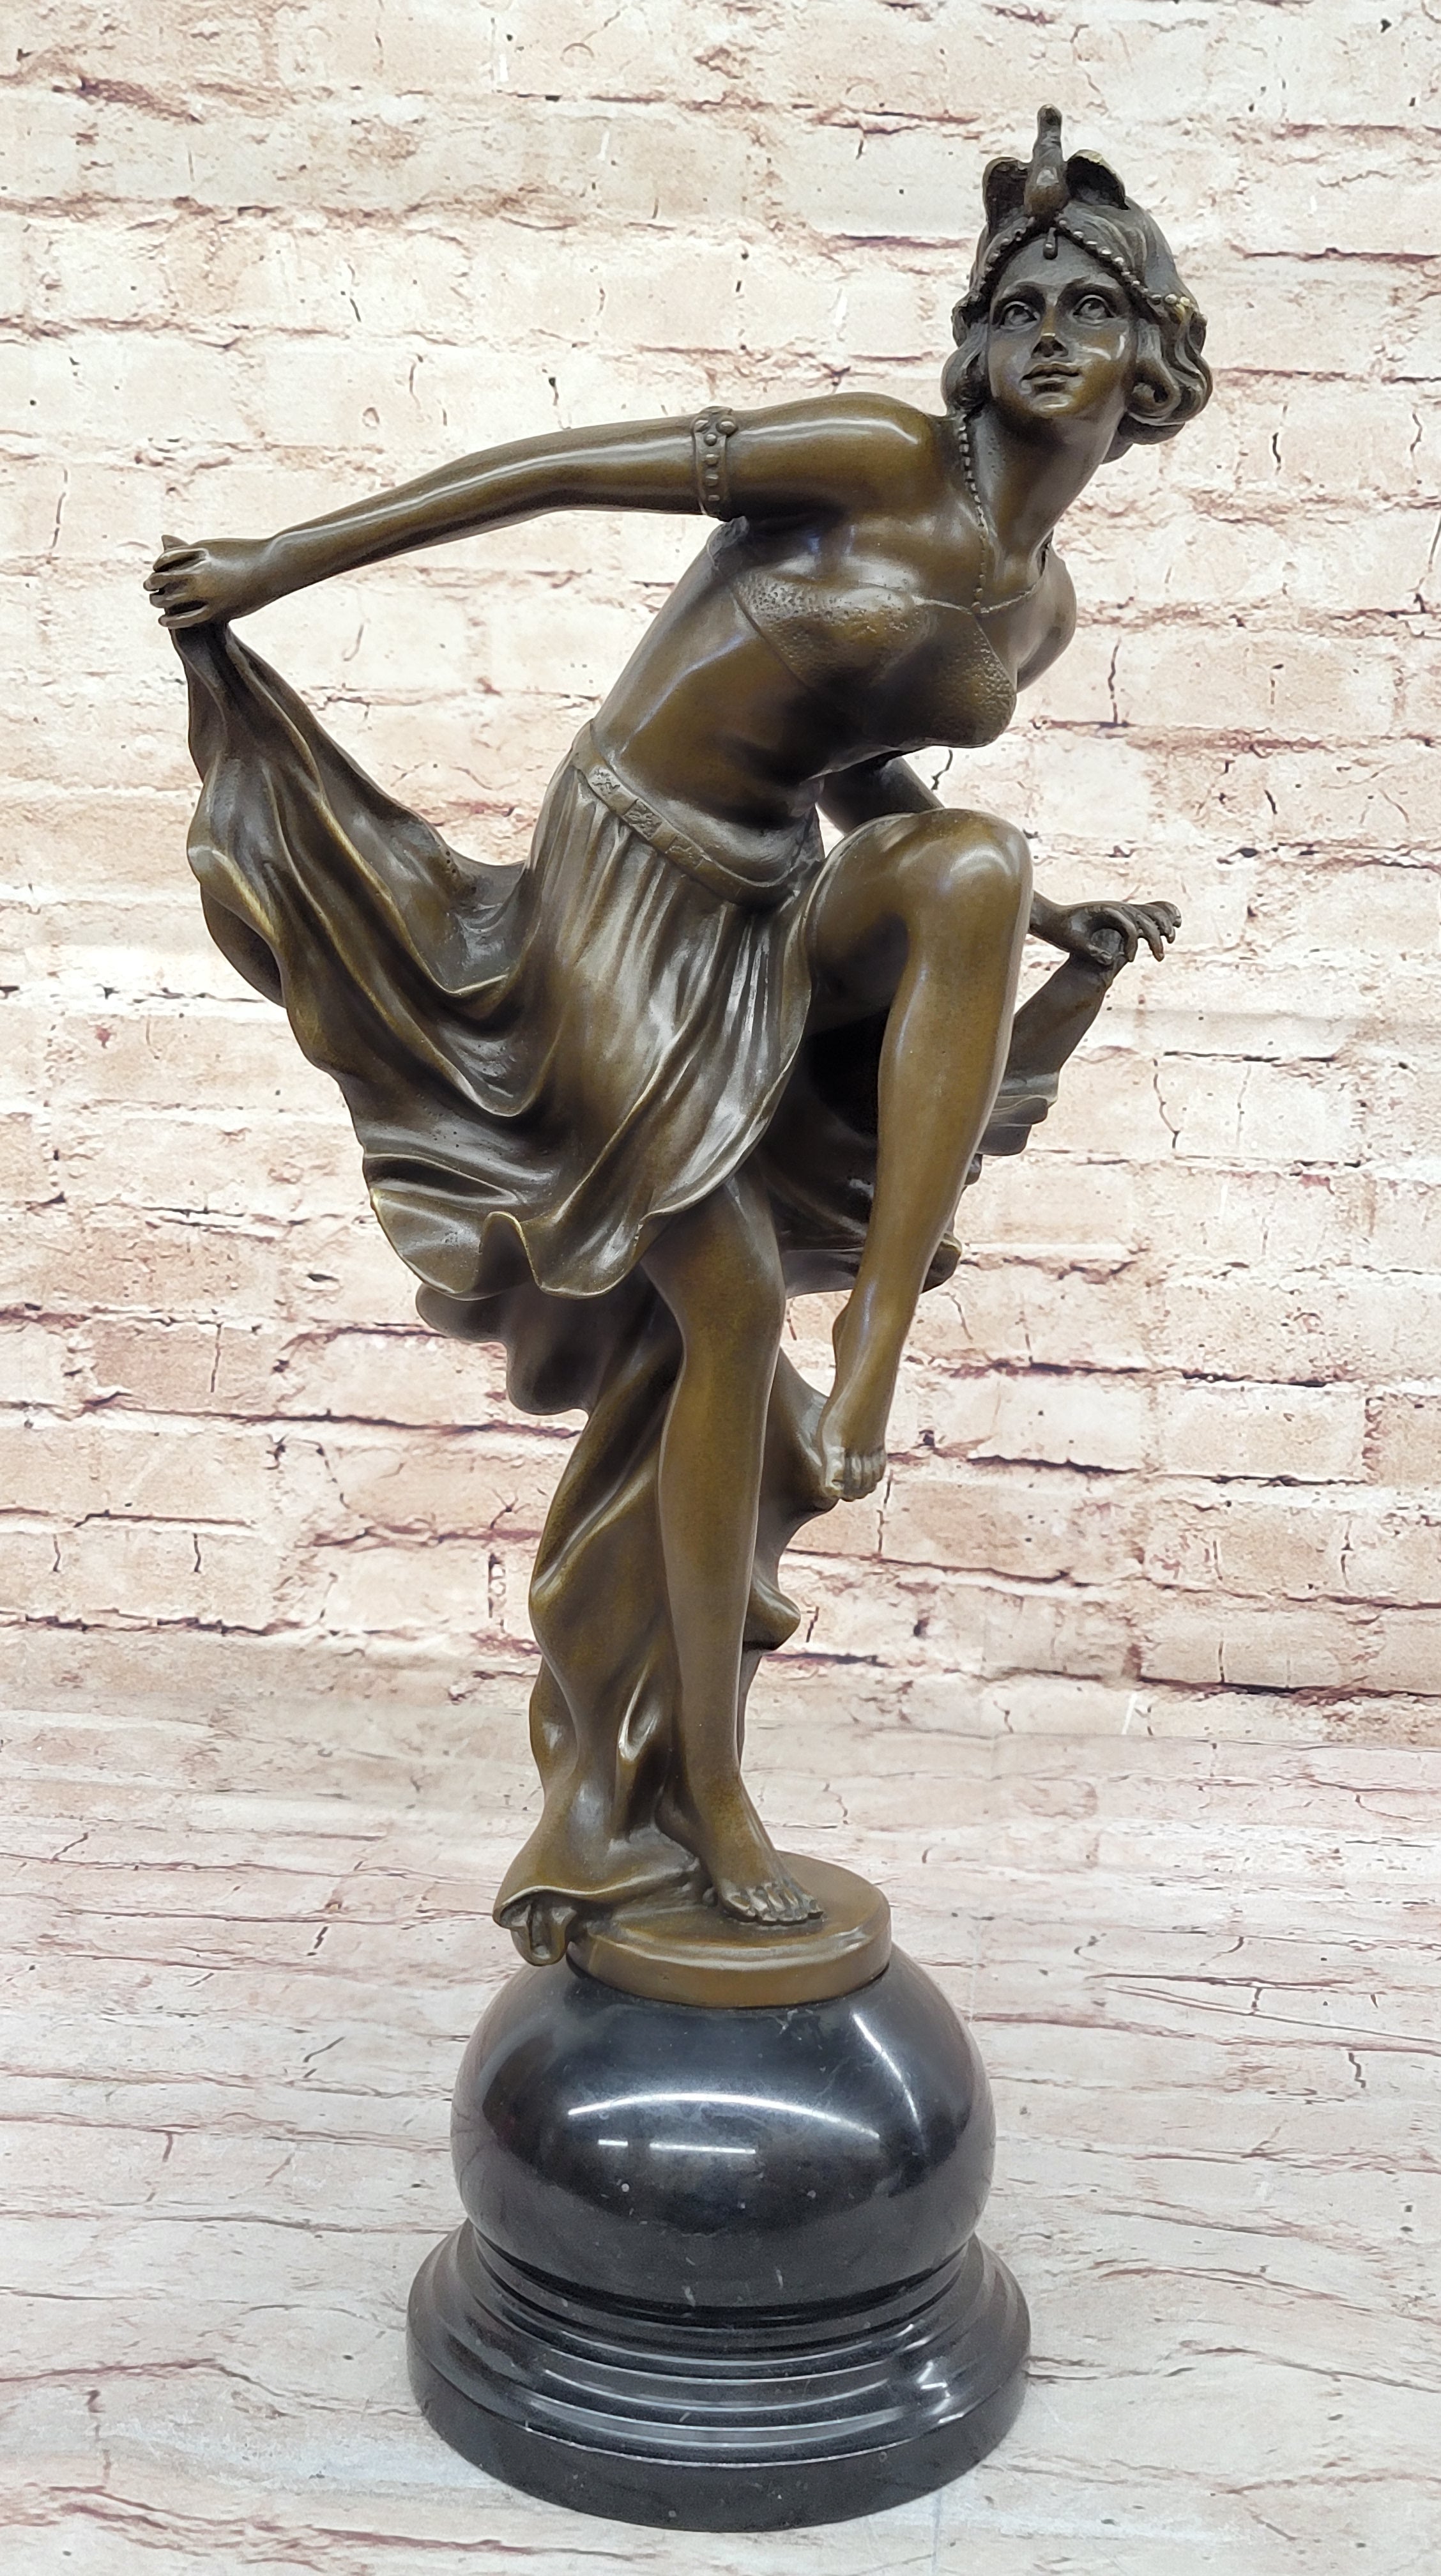 FRENCH, ART NOUVEAU LARGE BRONZE STATUE After GORY, GYPSY GIRL. HOT CAST FIGURE